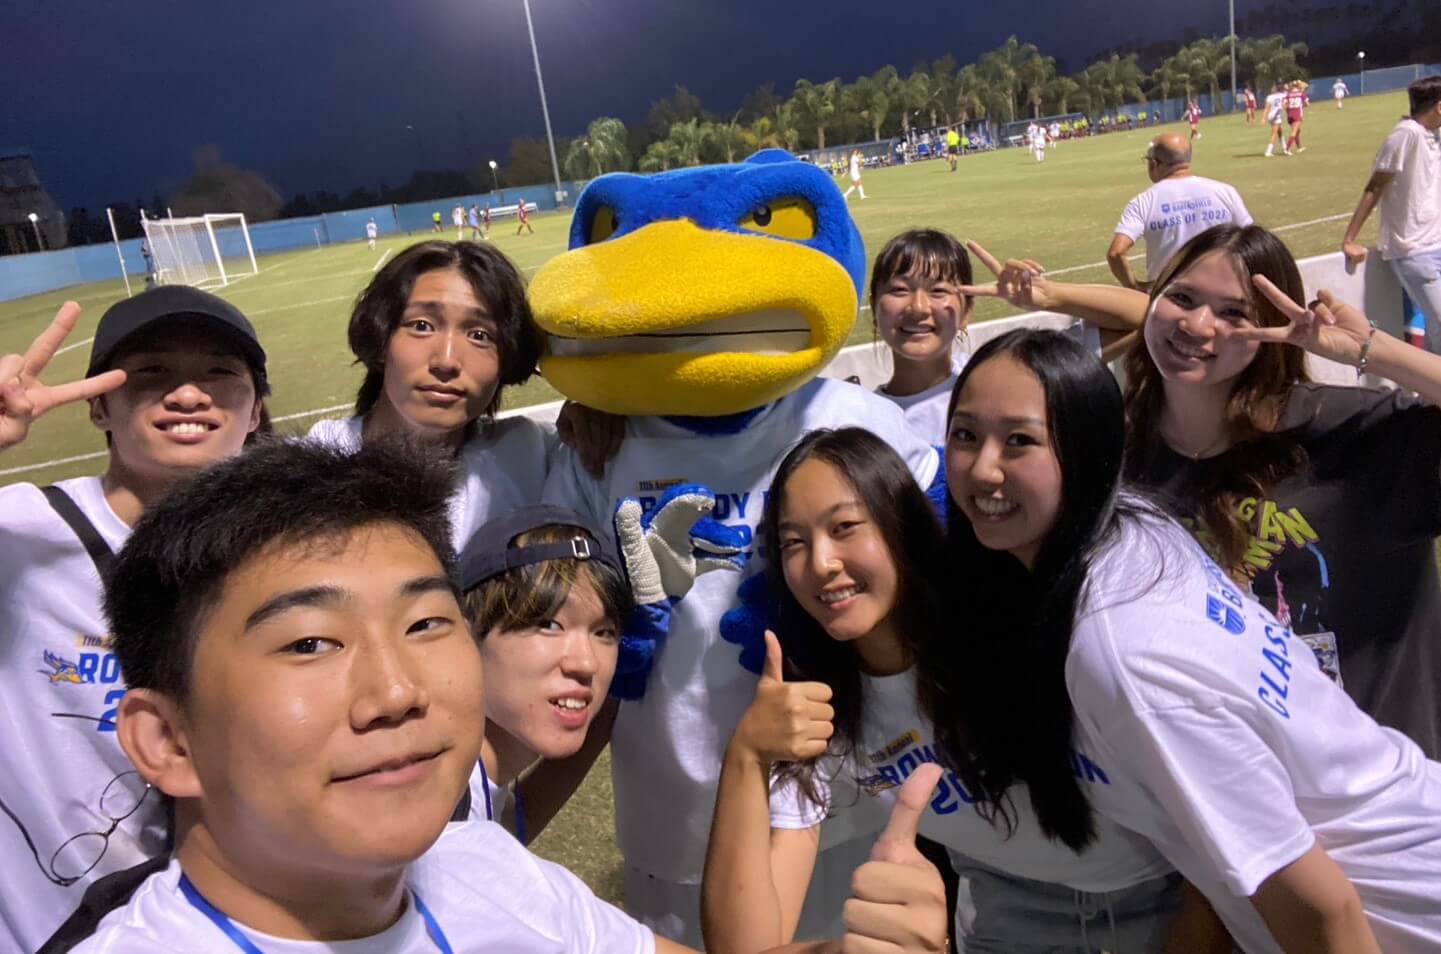 Students in a group photo with school mascot